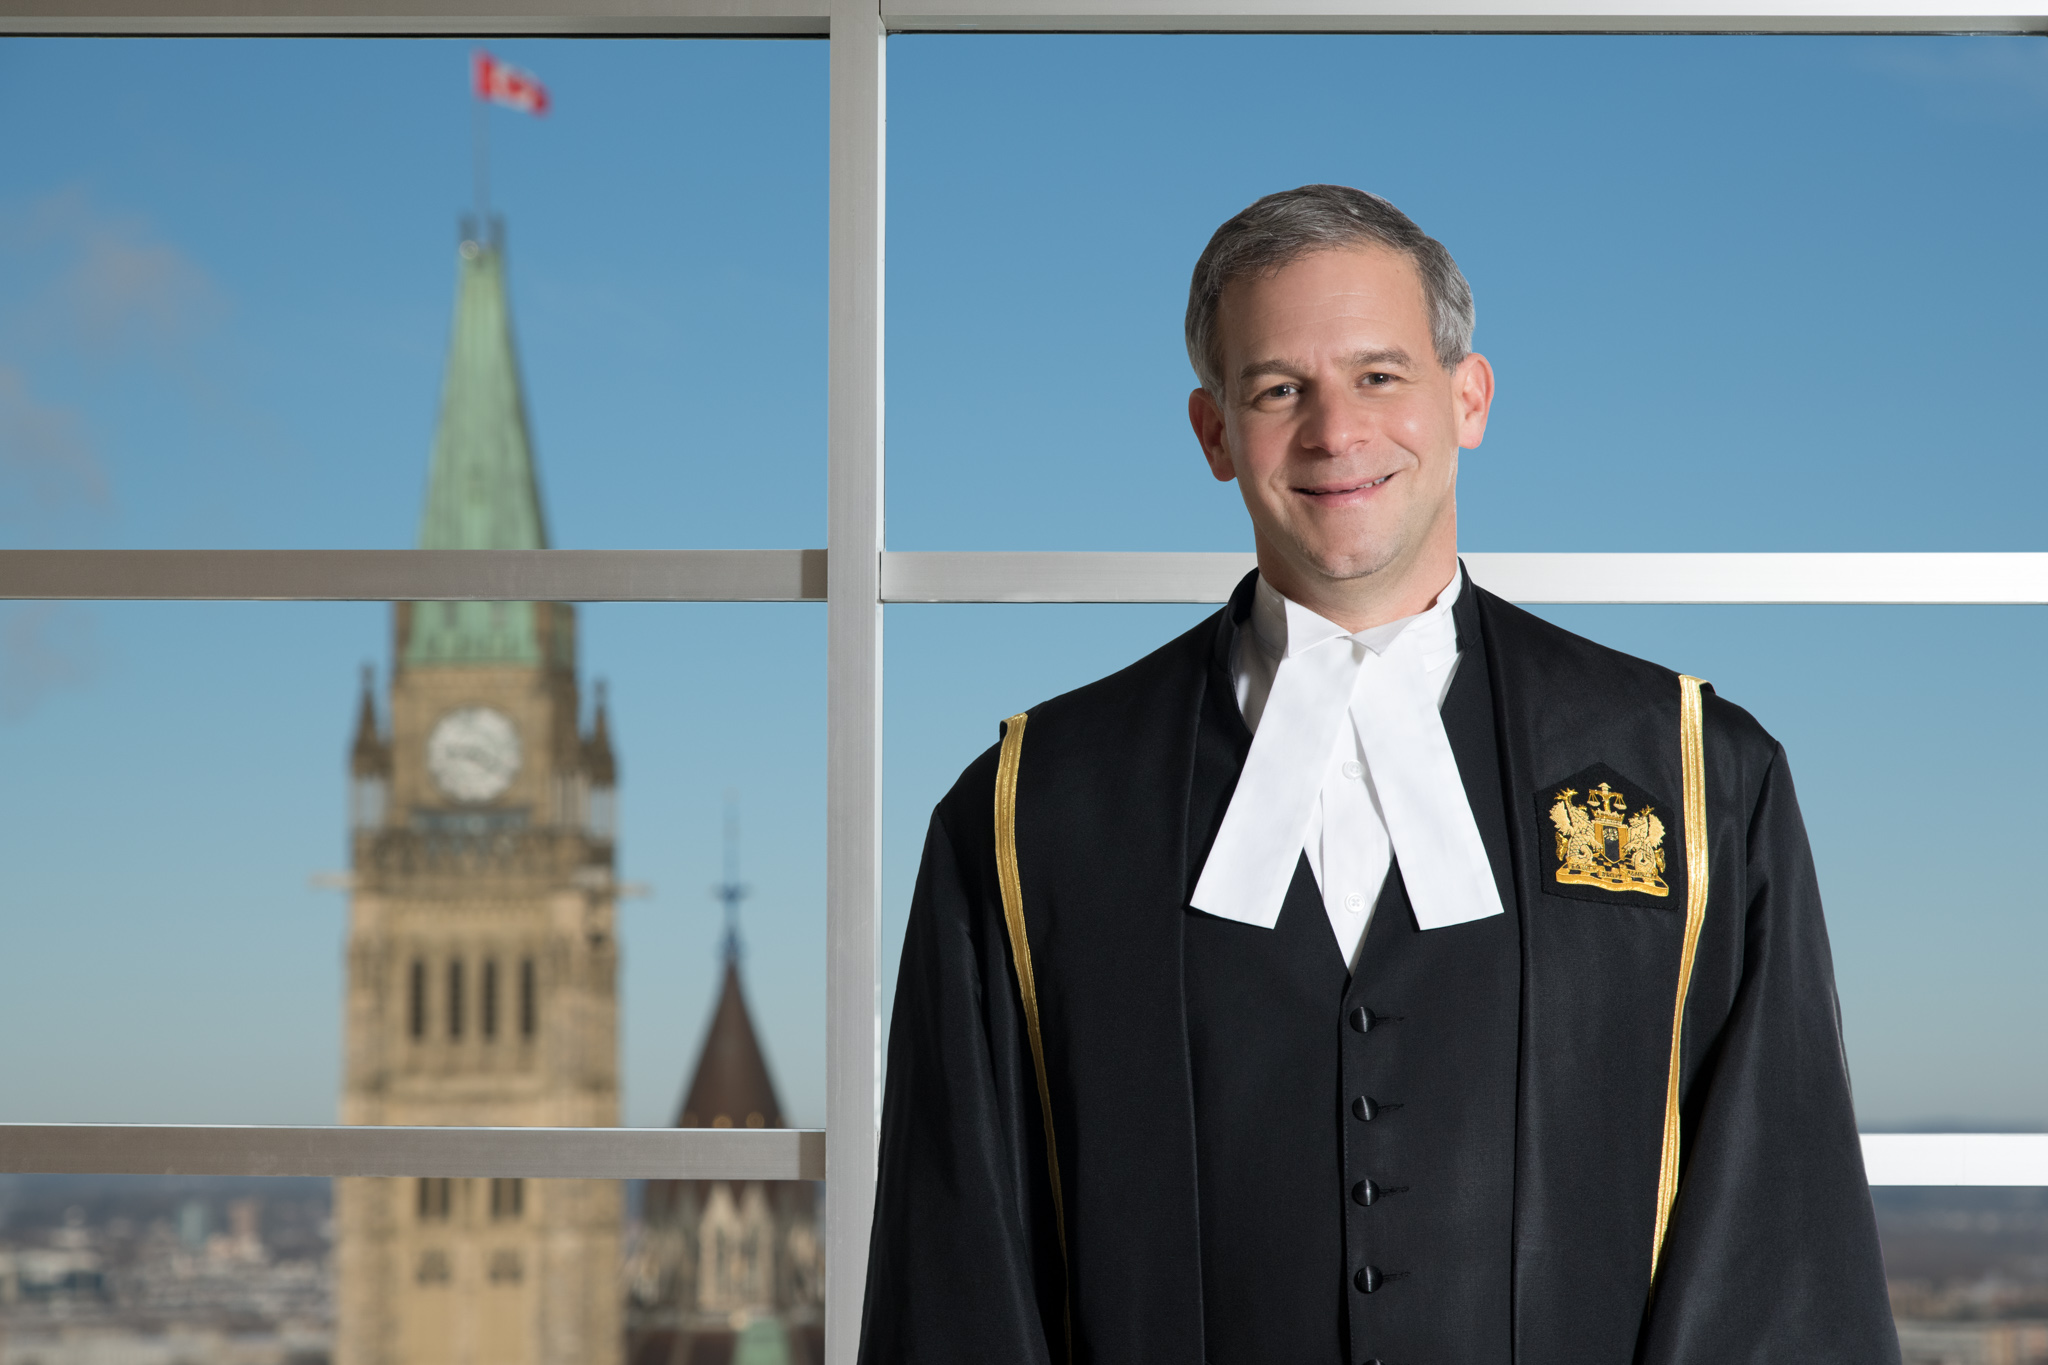 The Honourable Alan S. Diner